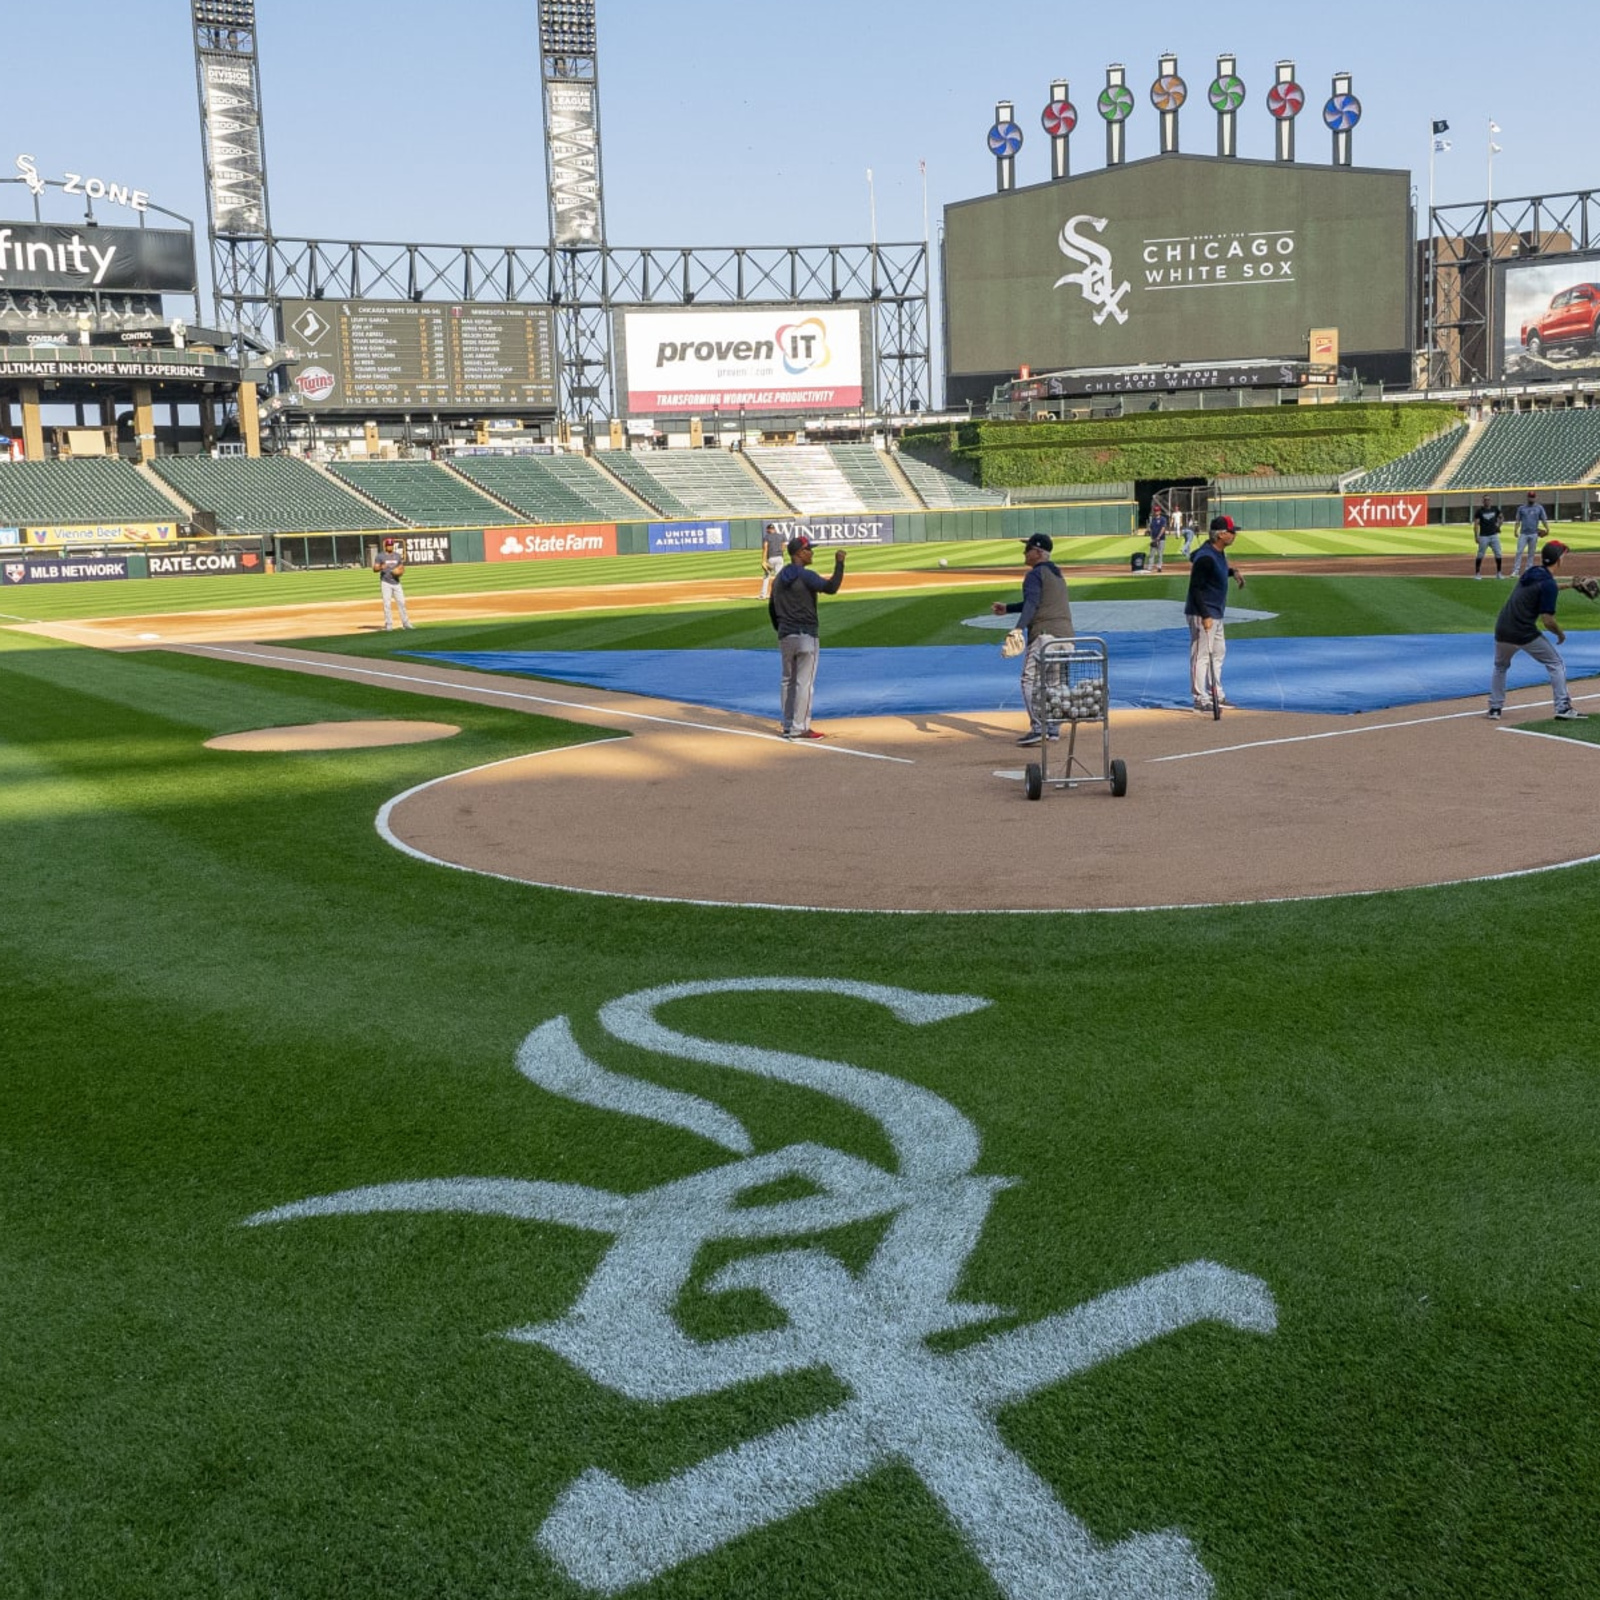 White Sox considering moving stadiums when lease expires: report